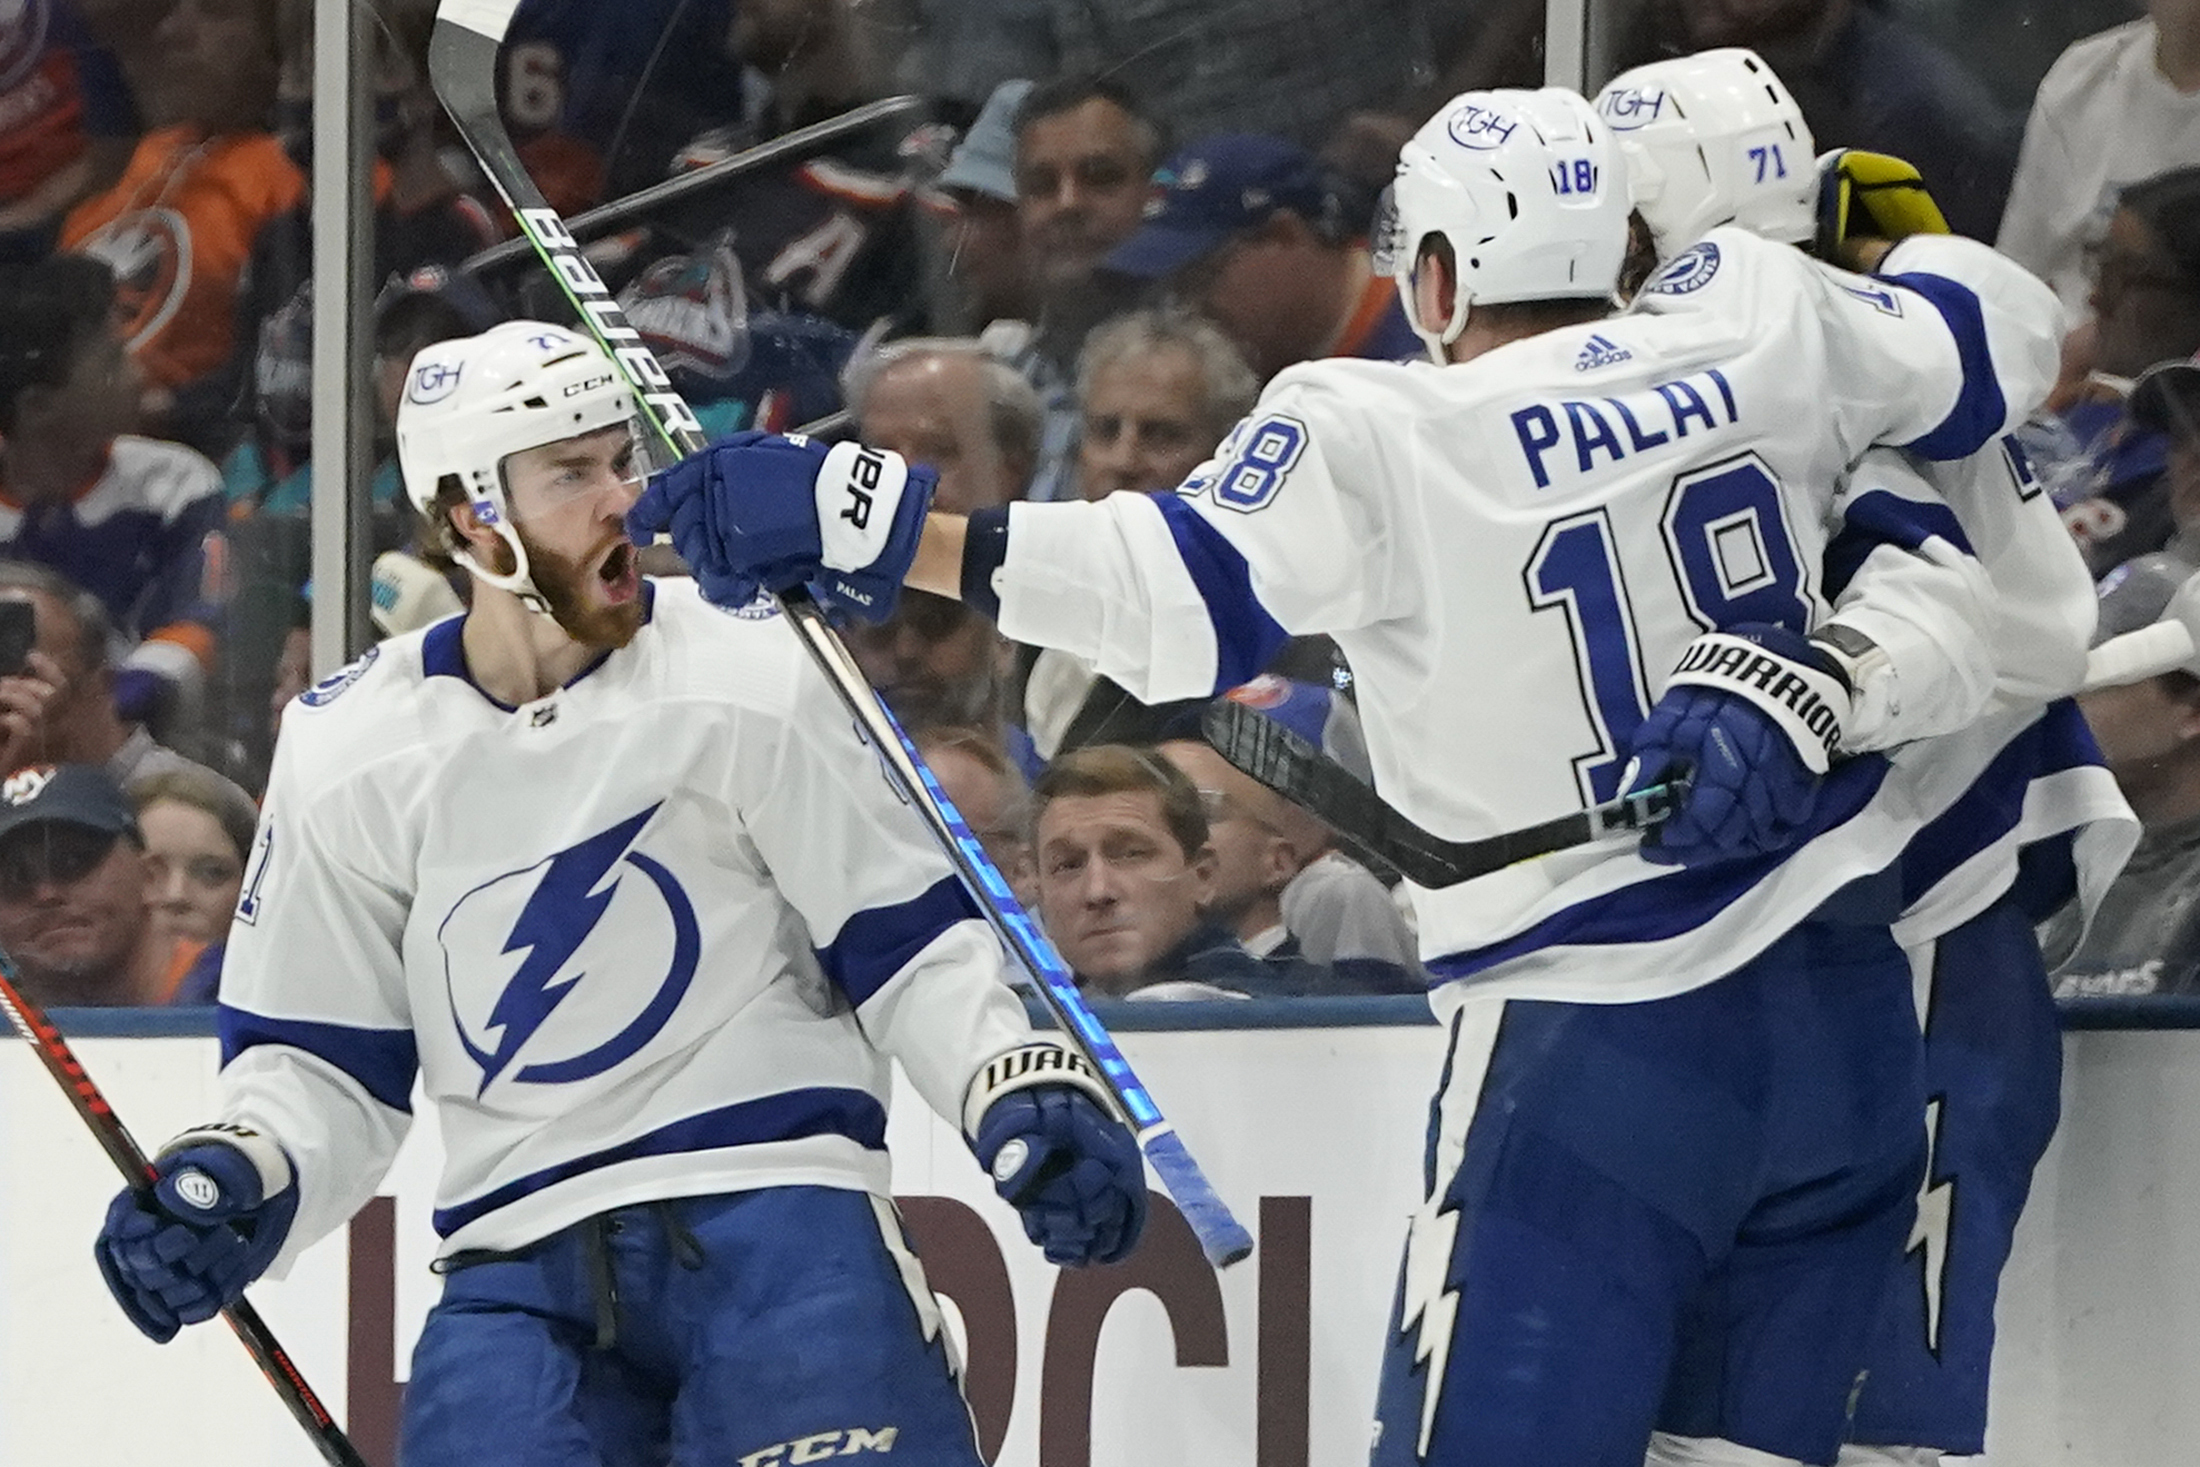 2020 NHL playoff preview: Lightning vs. Islanders - The Athletic